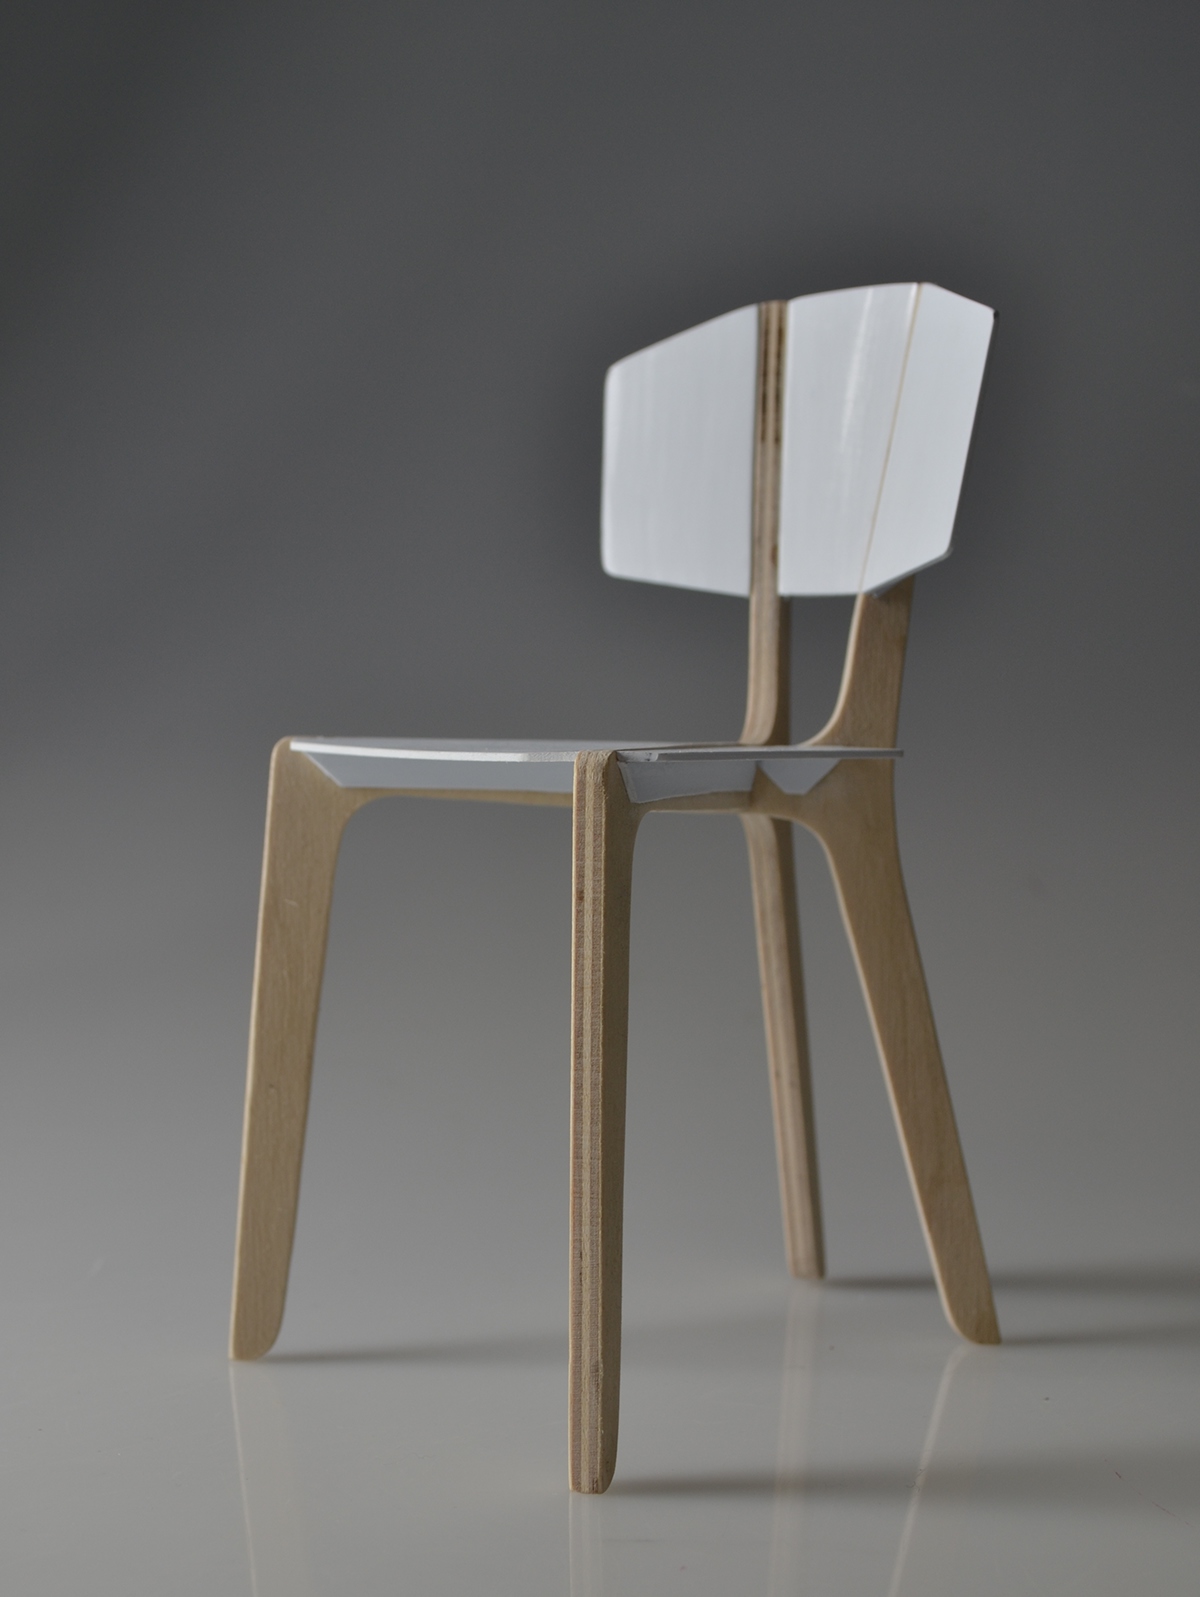 model scale chair